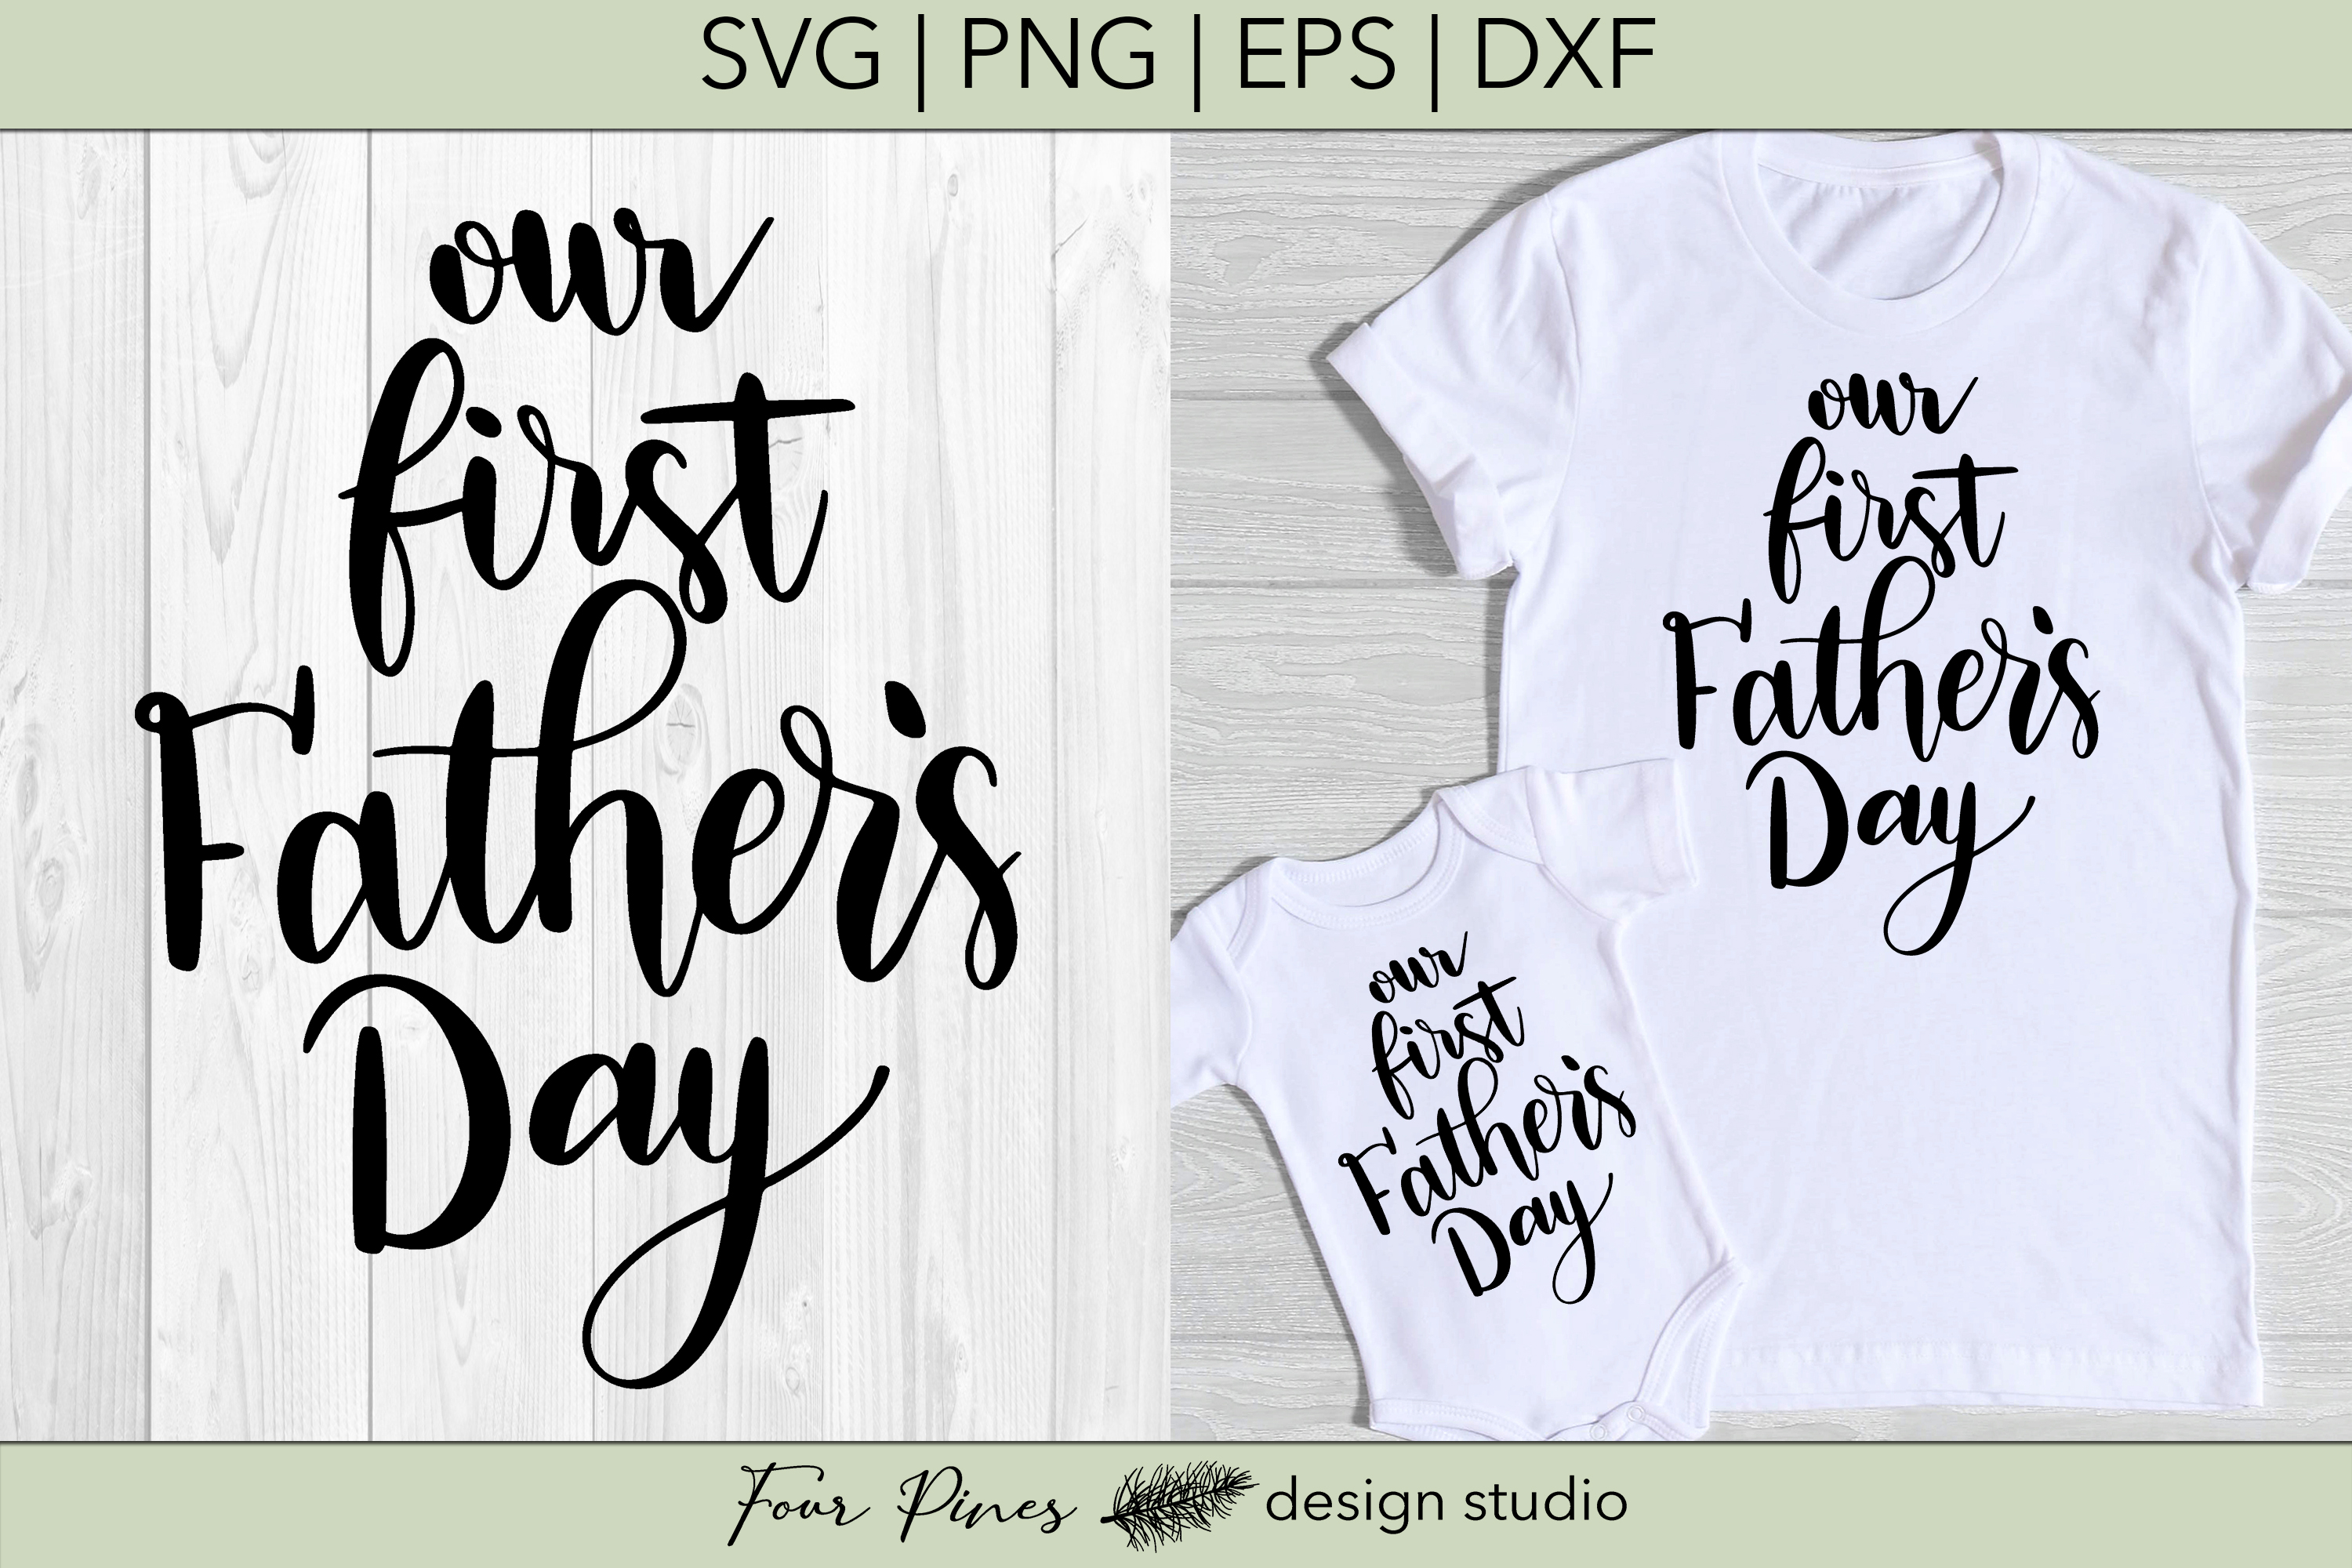 Our First Father's Day - Cut File SVG png eps dxf